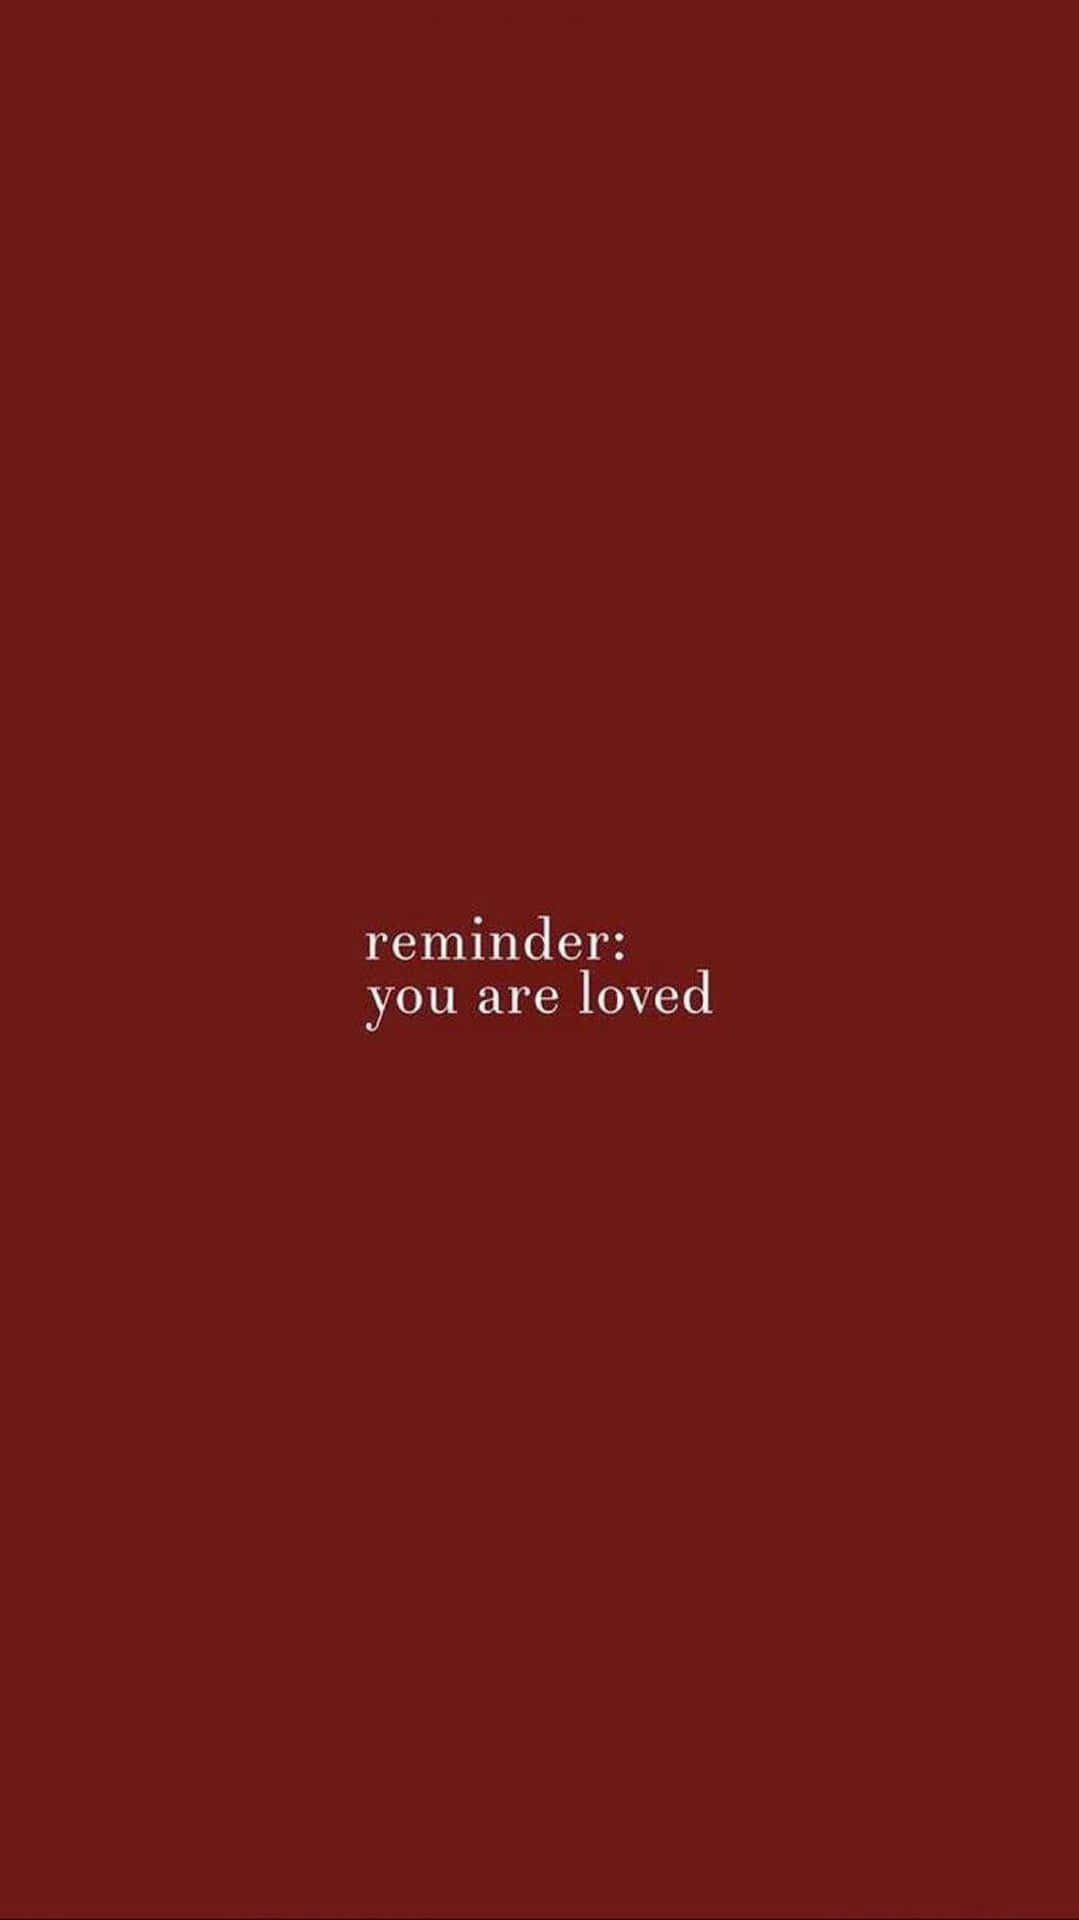 A Red Cover With The Words Remember You Are Loved